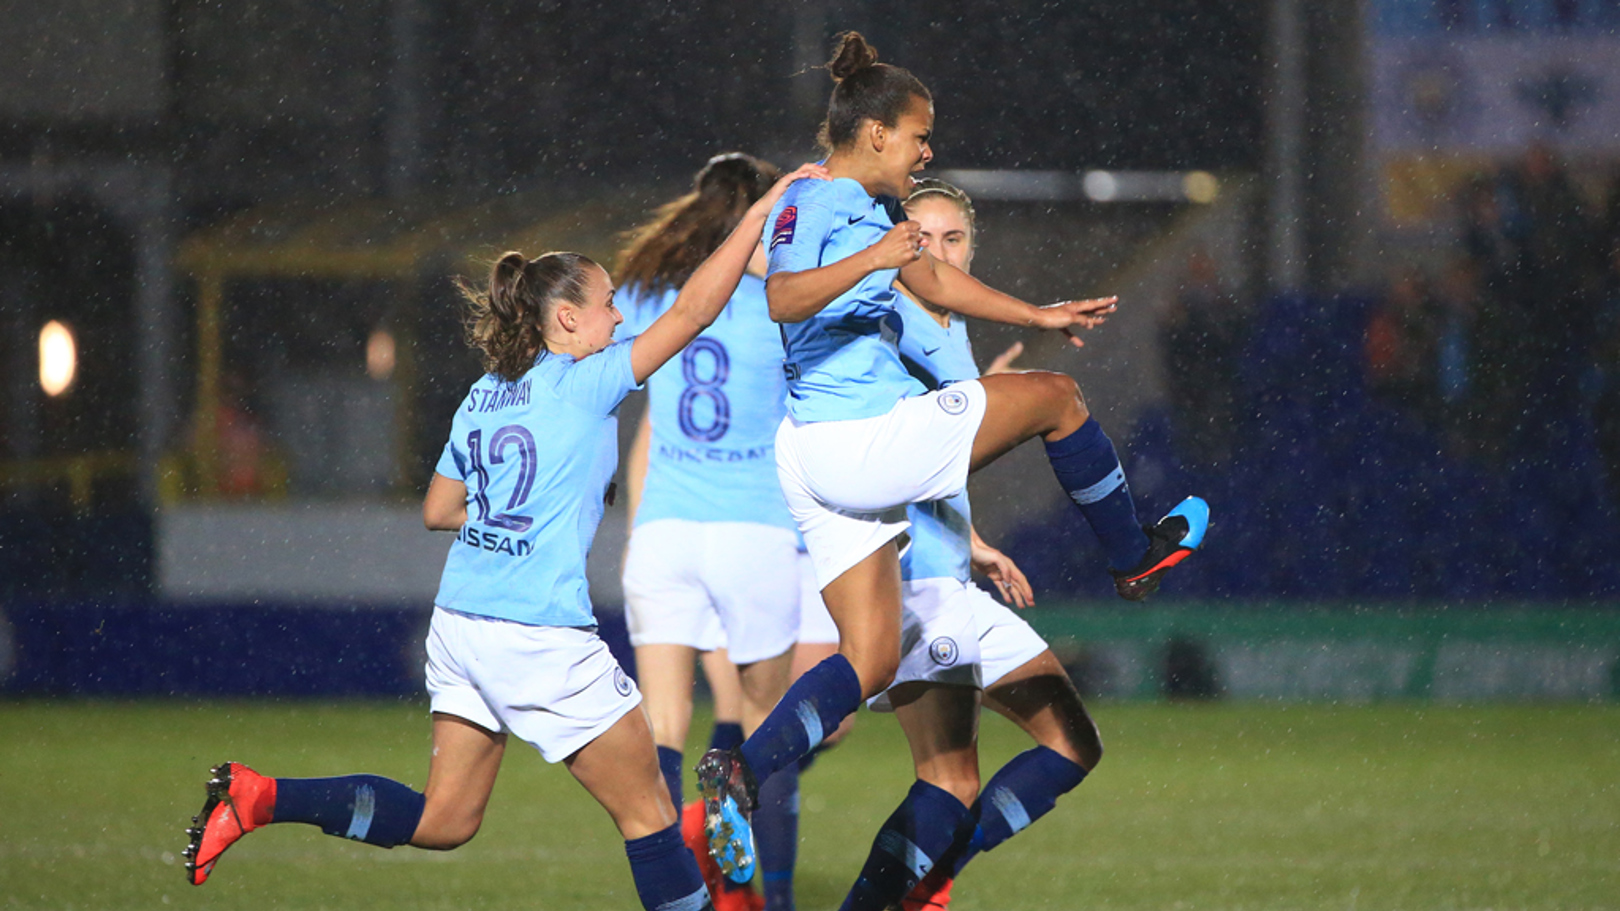 Gatorade becomes sports nutrition partner of MCWFC